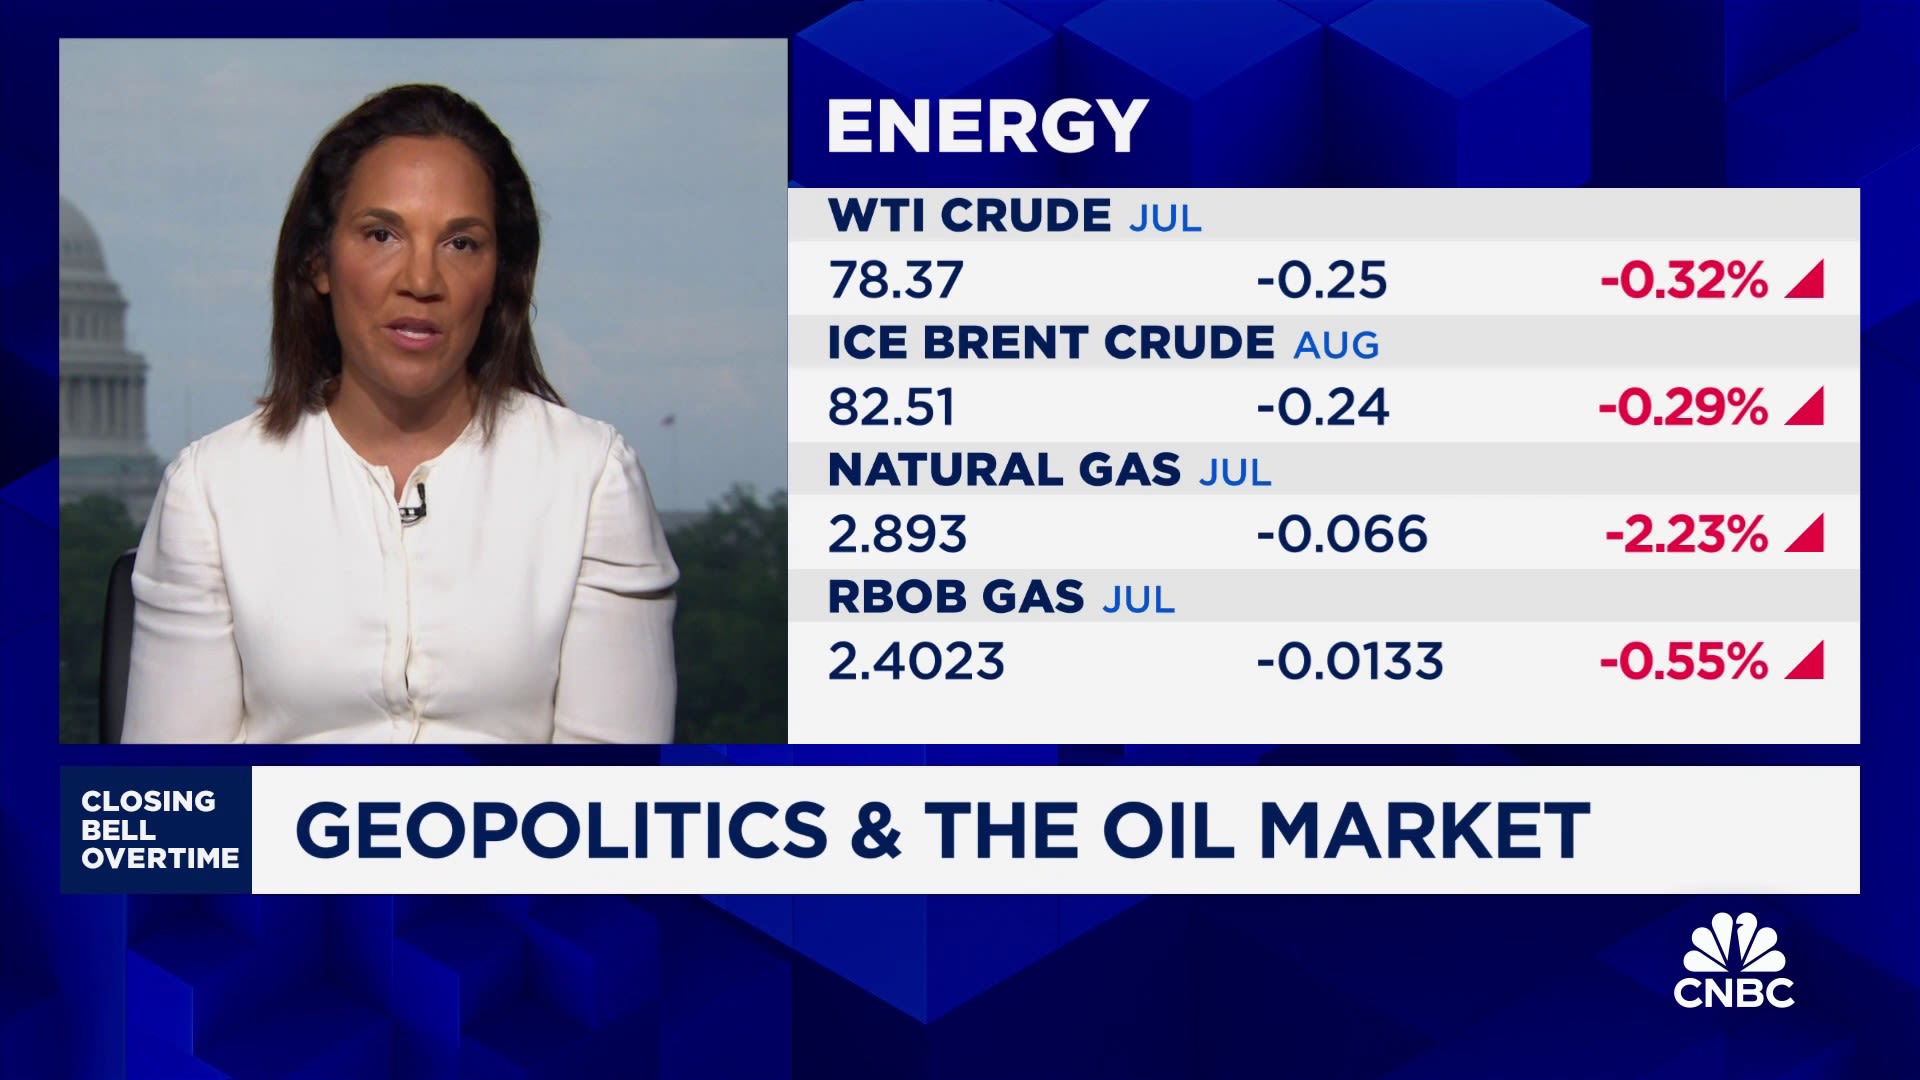 Oil market likely to get tighter through the summer, says RBC's Helima Croft